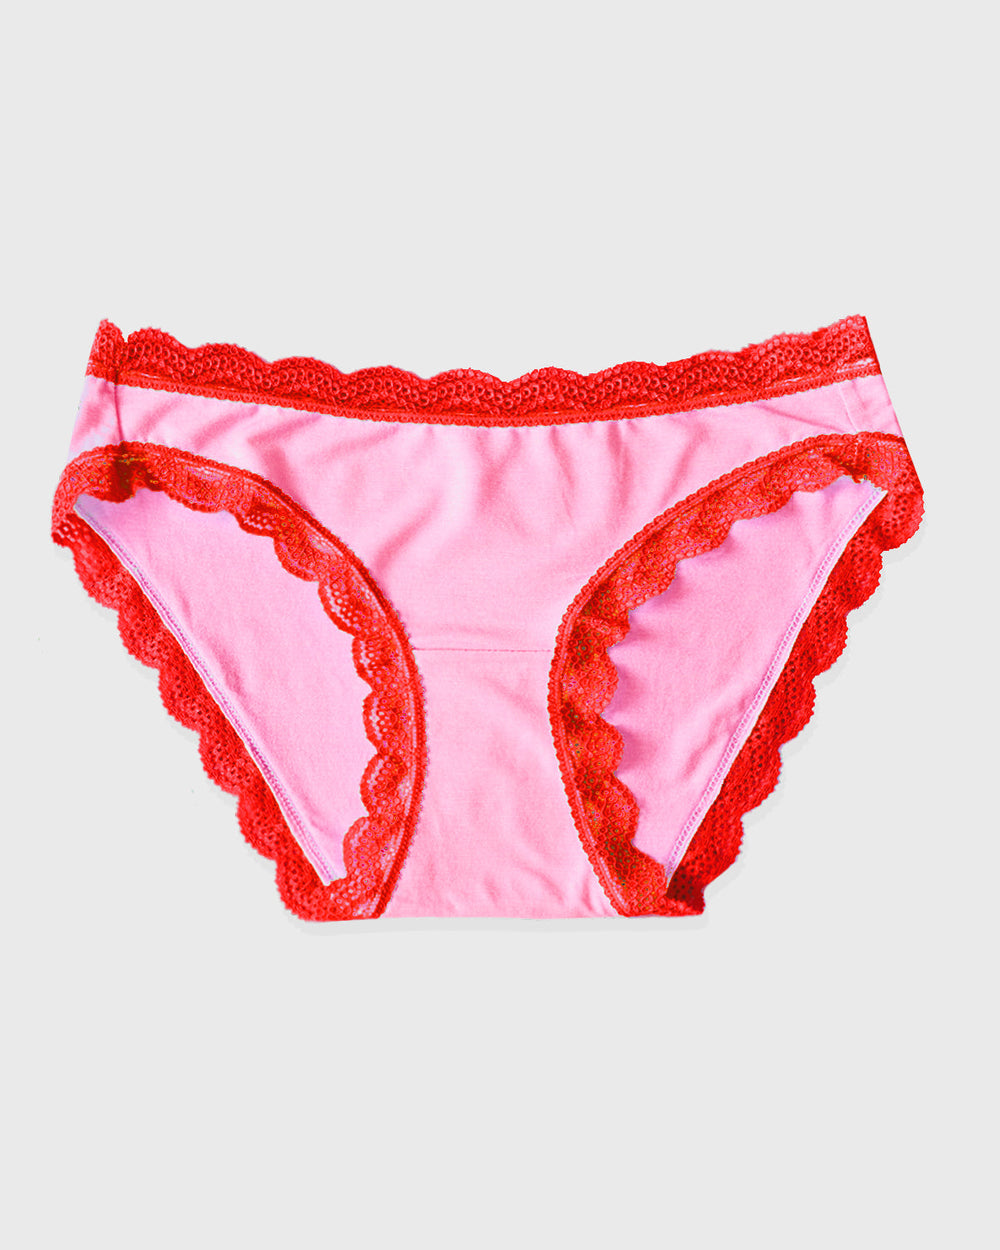 The Original Brief - Pink and Red Contrast Stripe & Stare